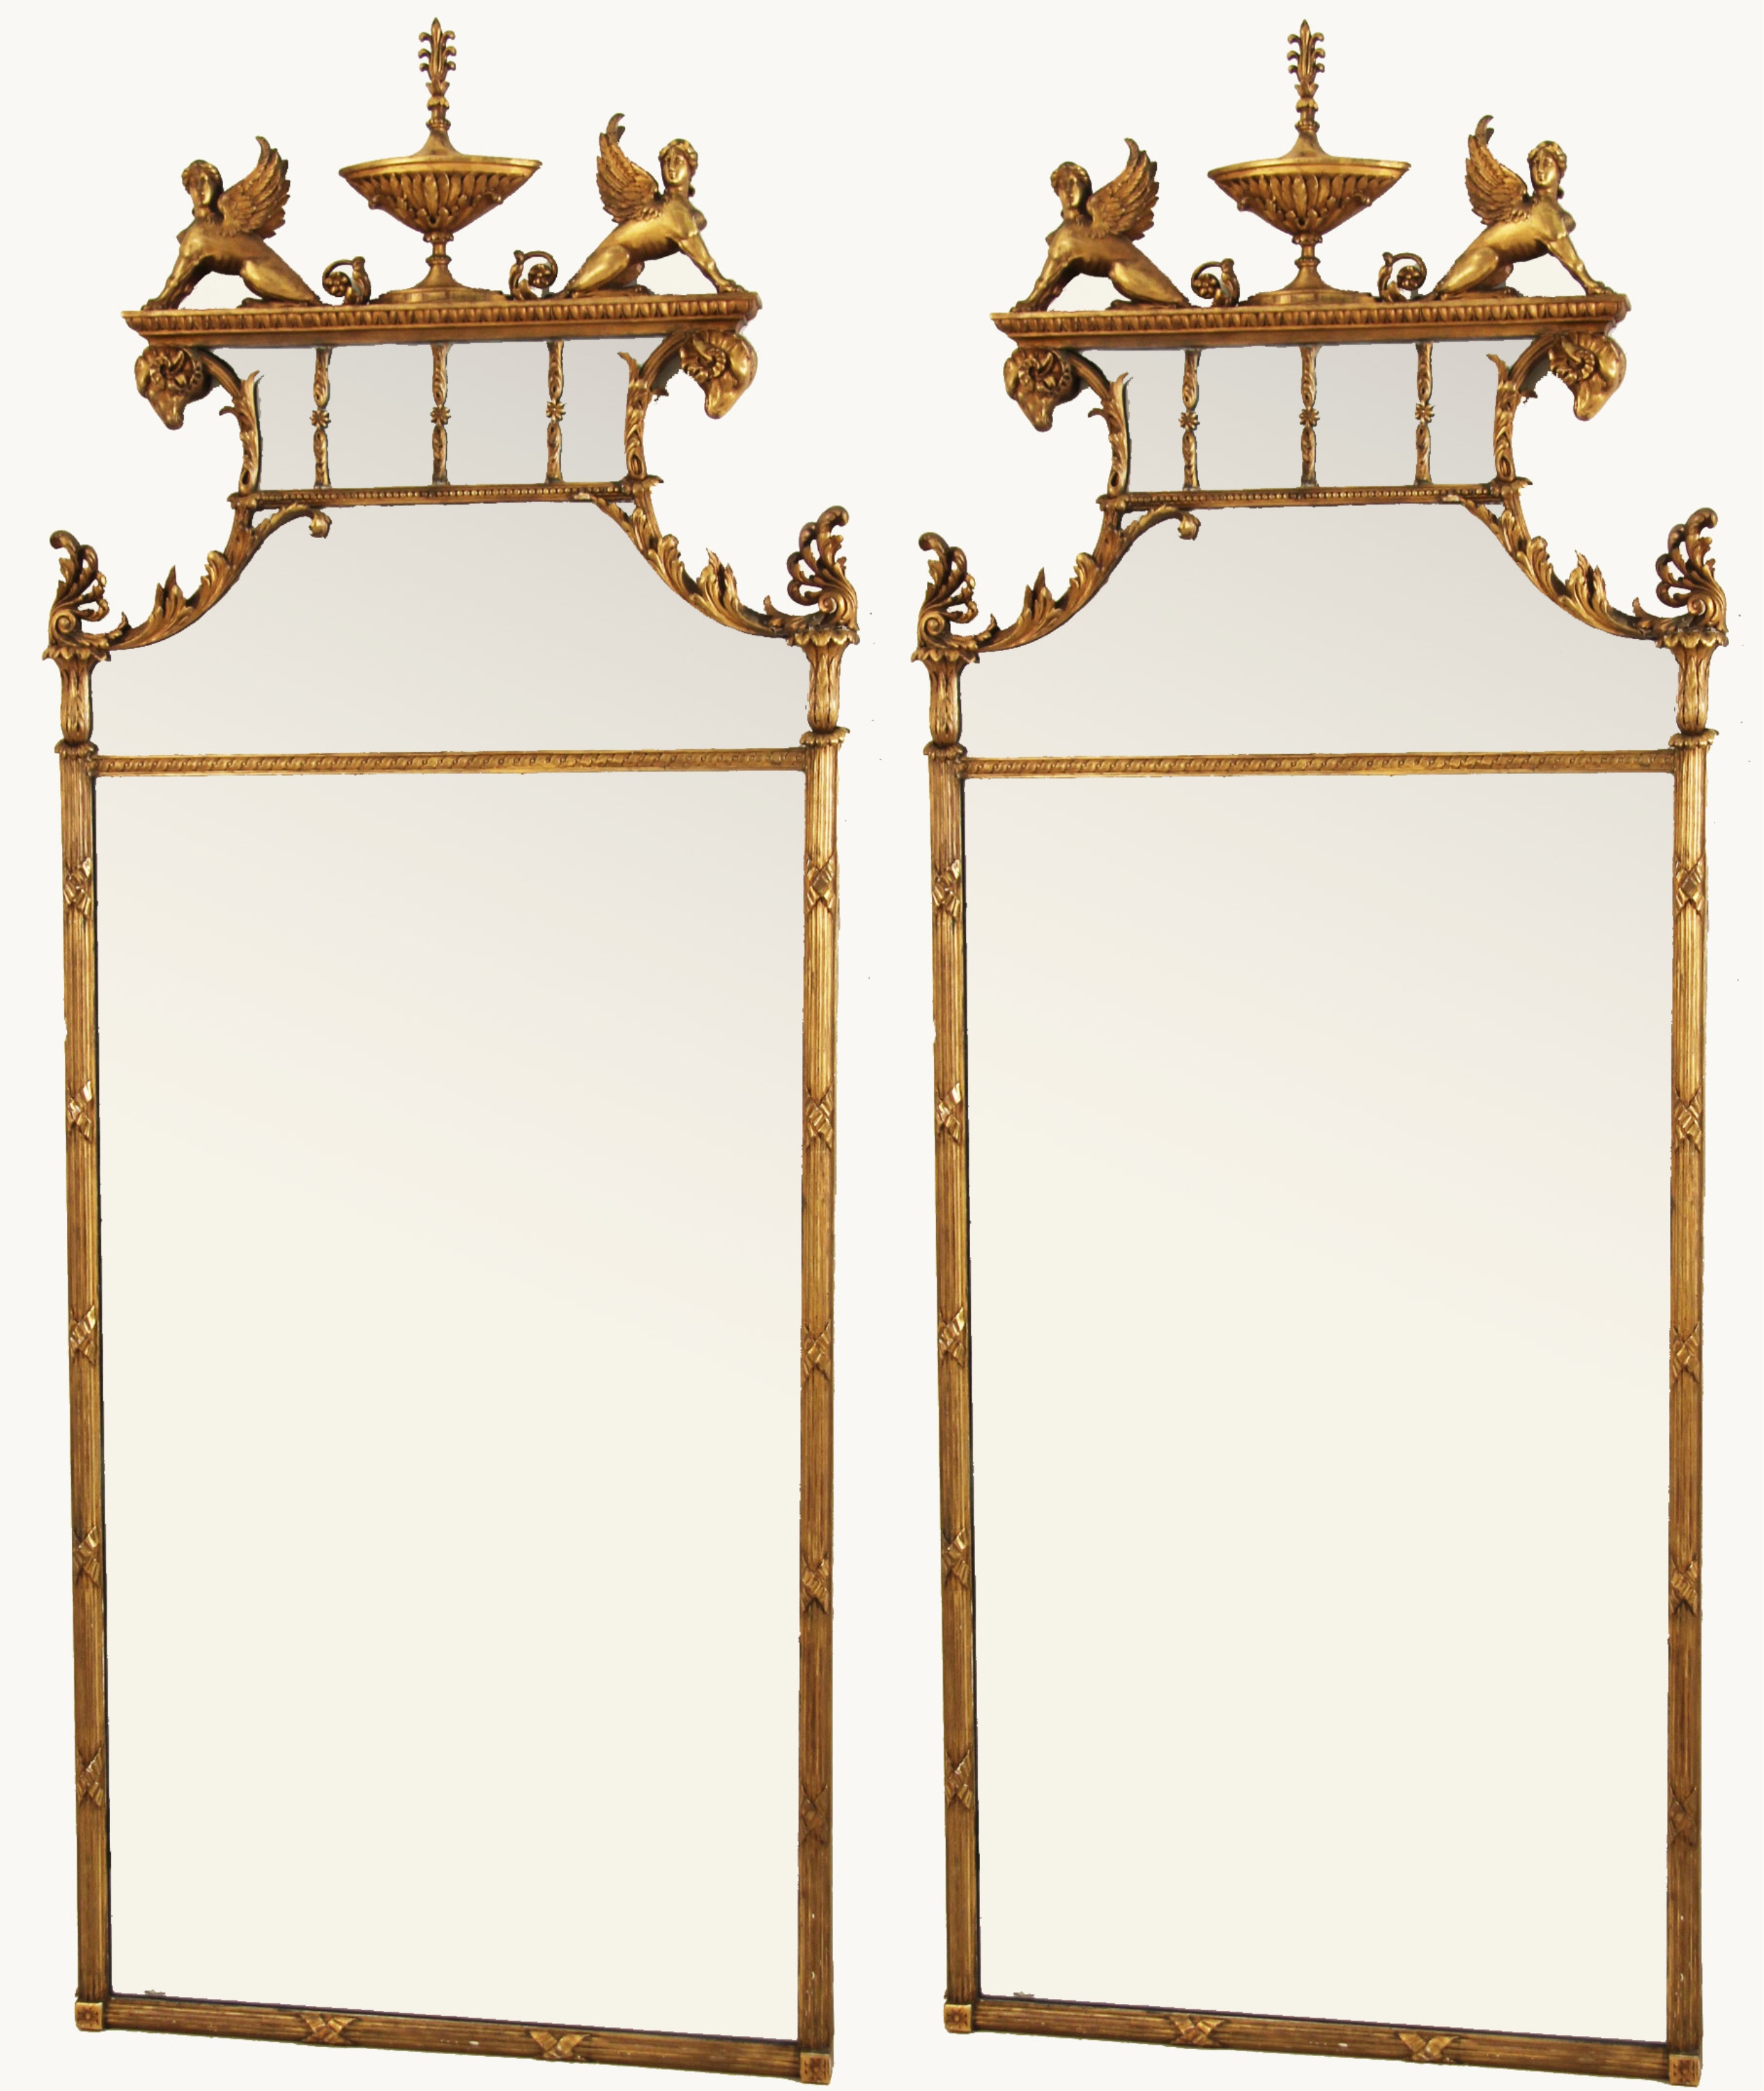 PAIR OF GEORGIAN CARVED GILTWOOD 2a59bd